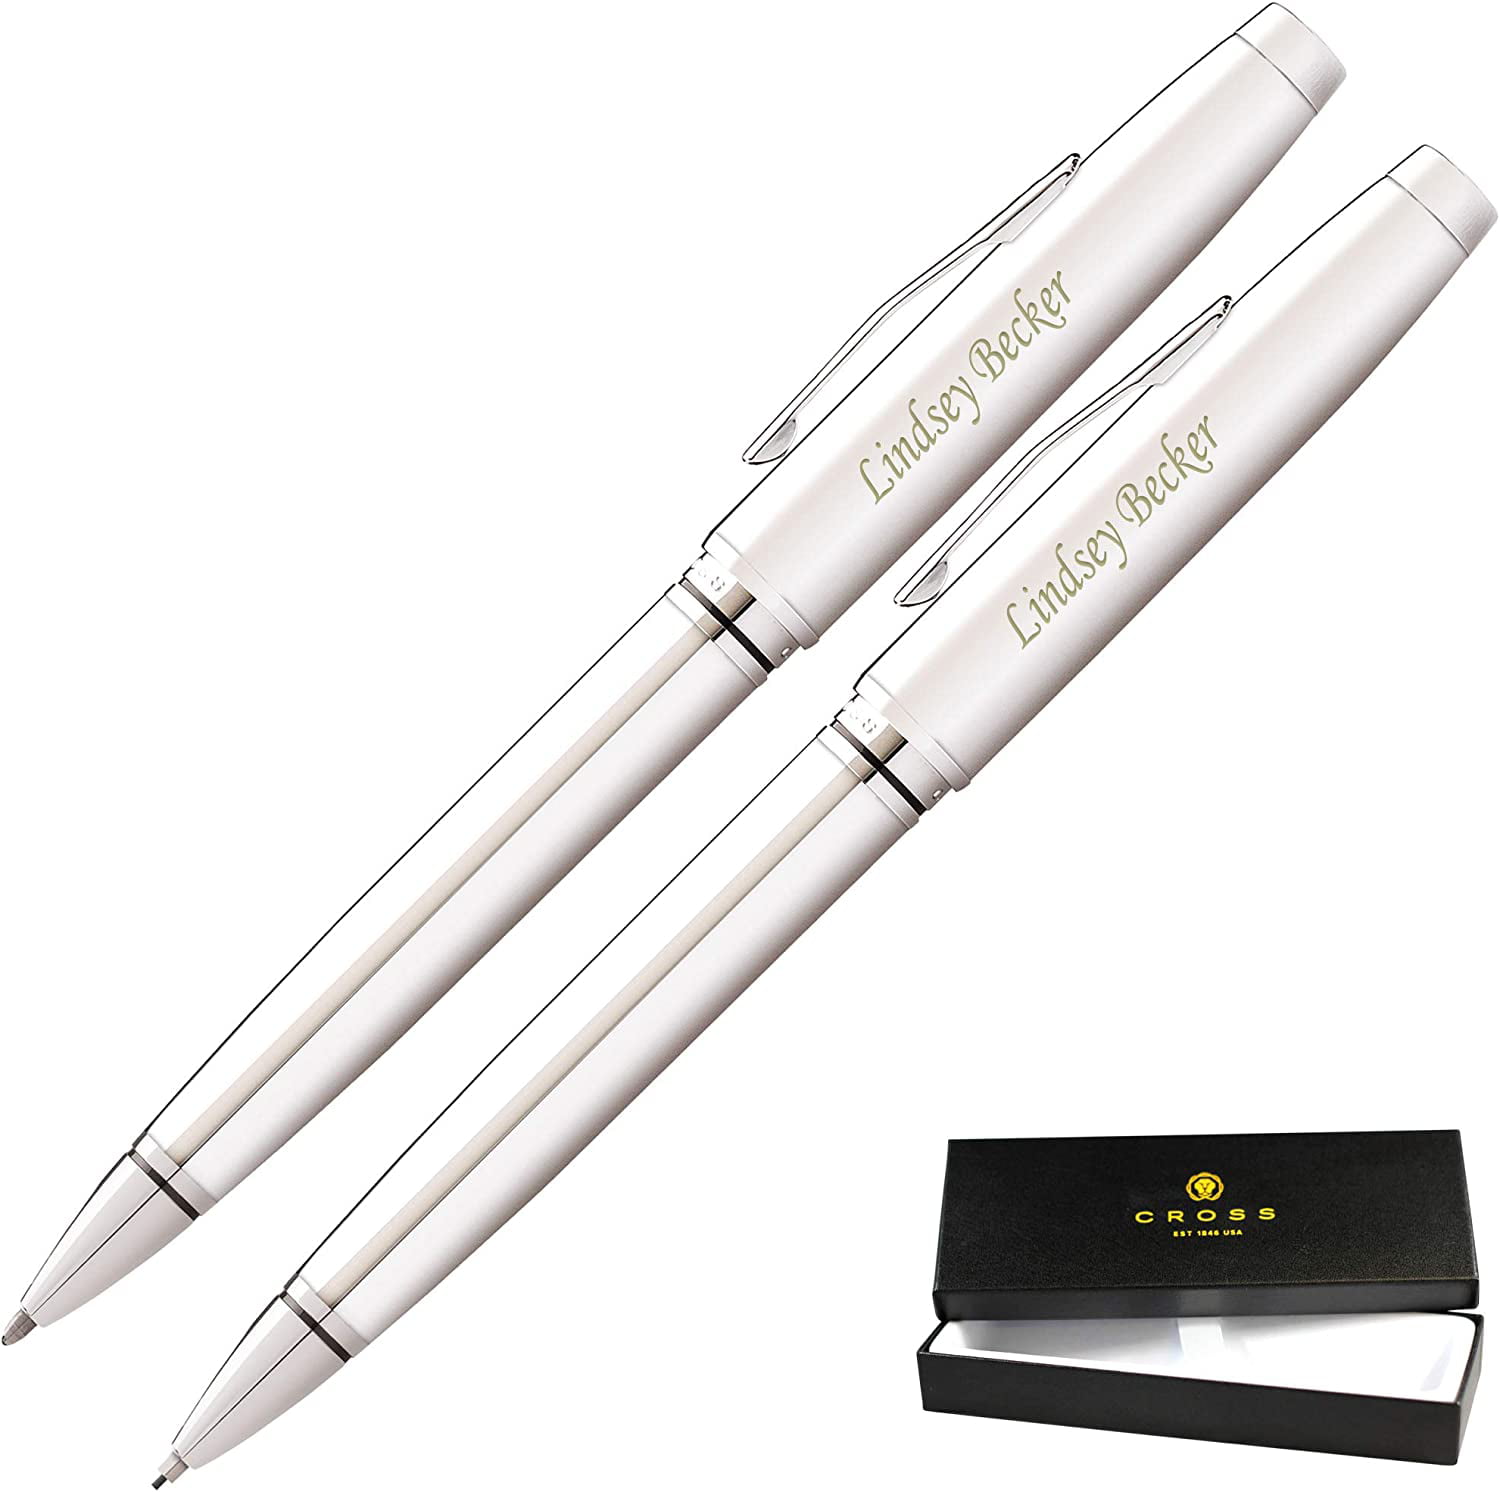 Brand New Cross Coventry Satin Chrome With Gold Trim Ball-Point Pen M Pencil Set 